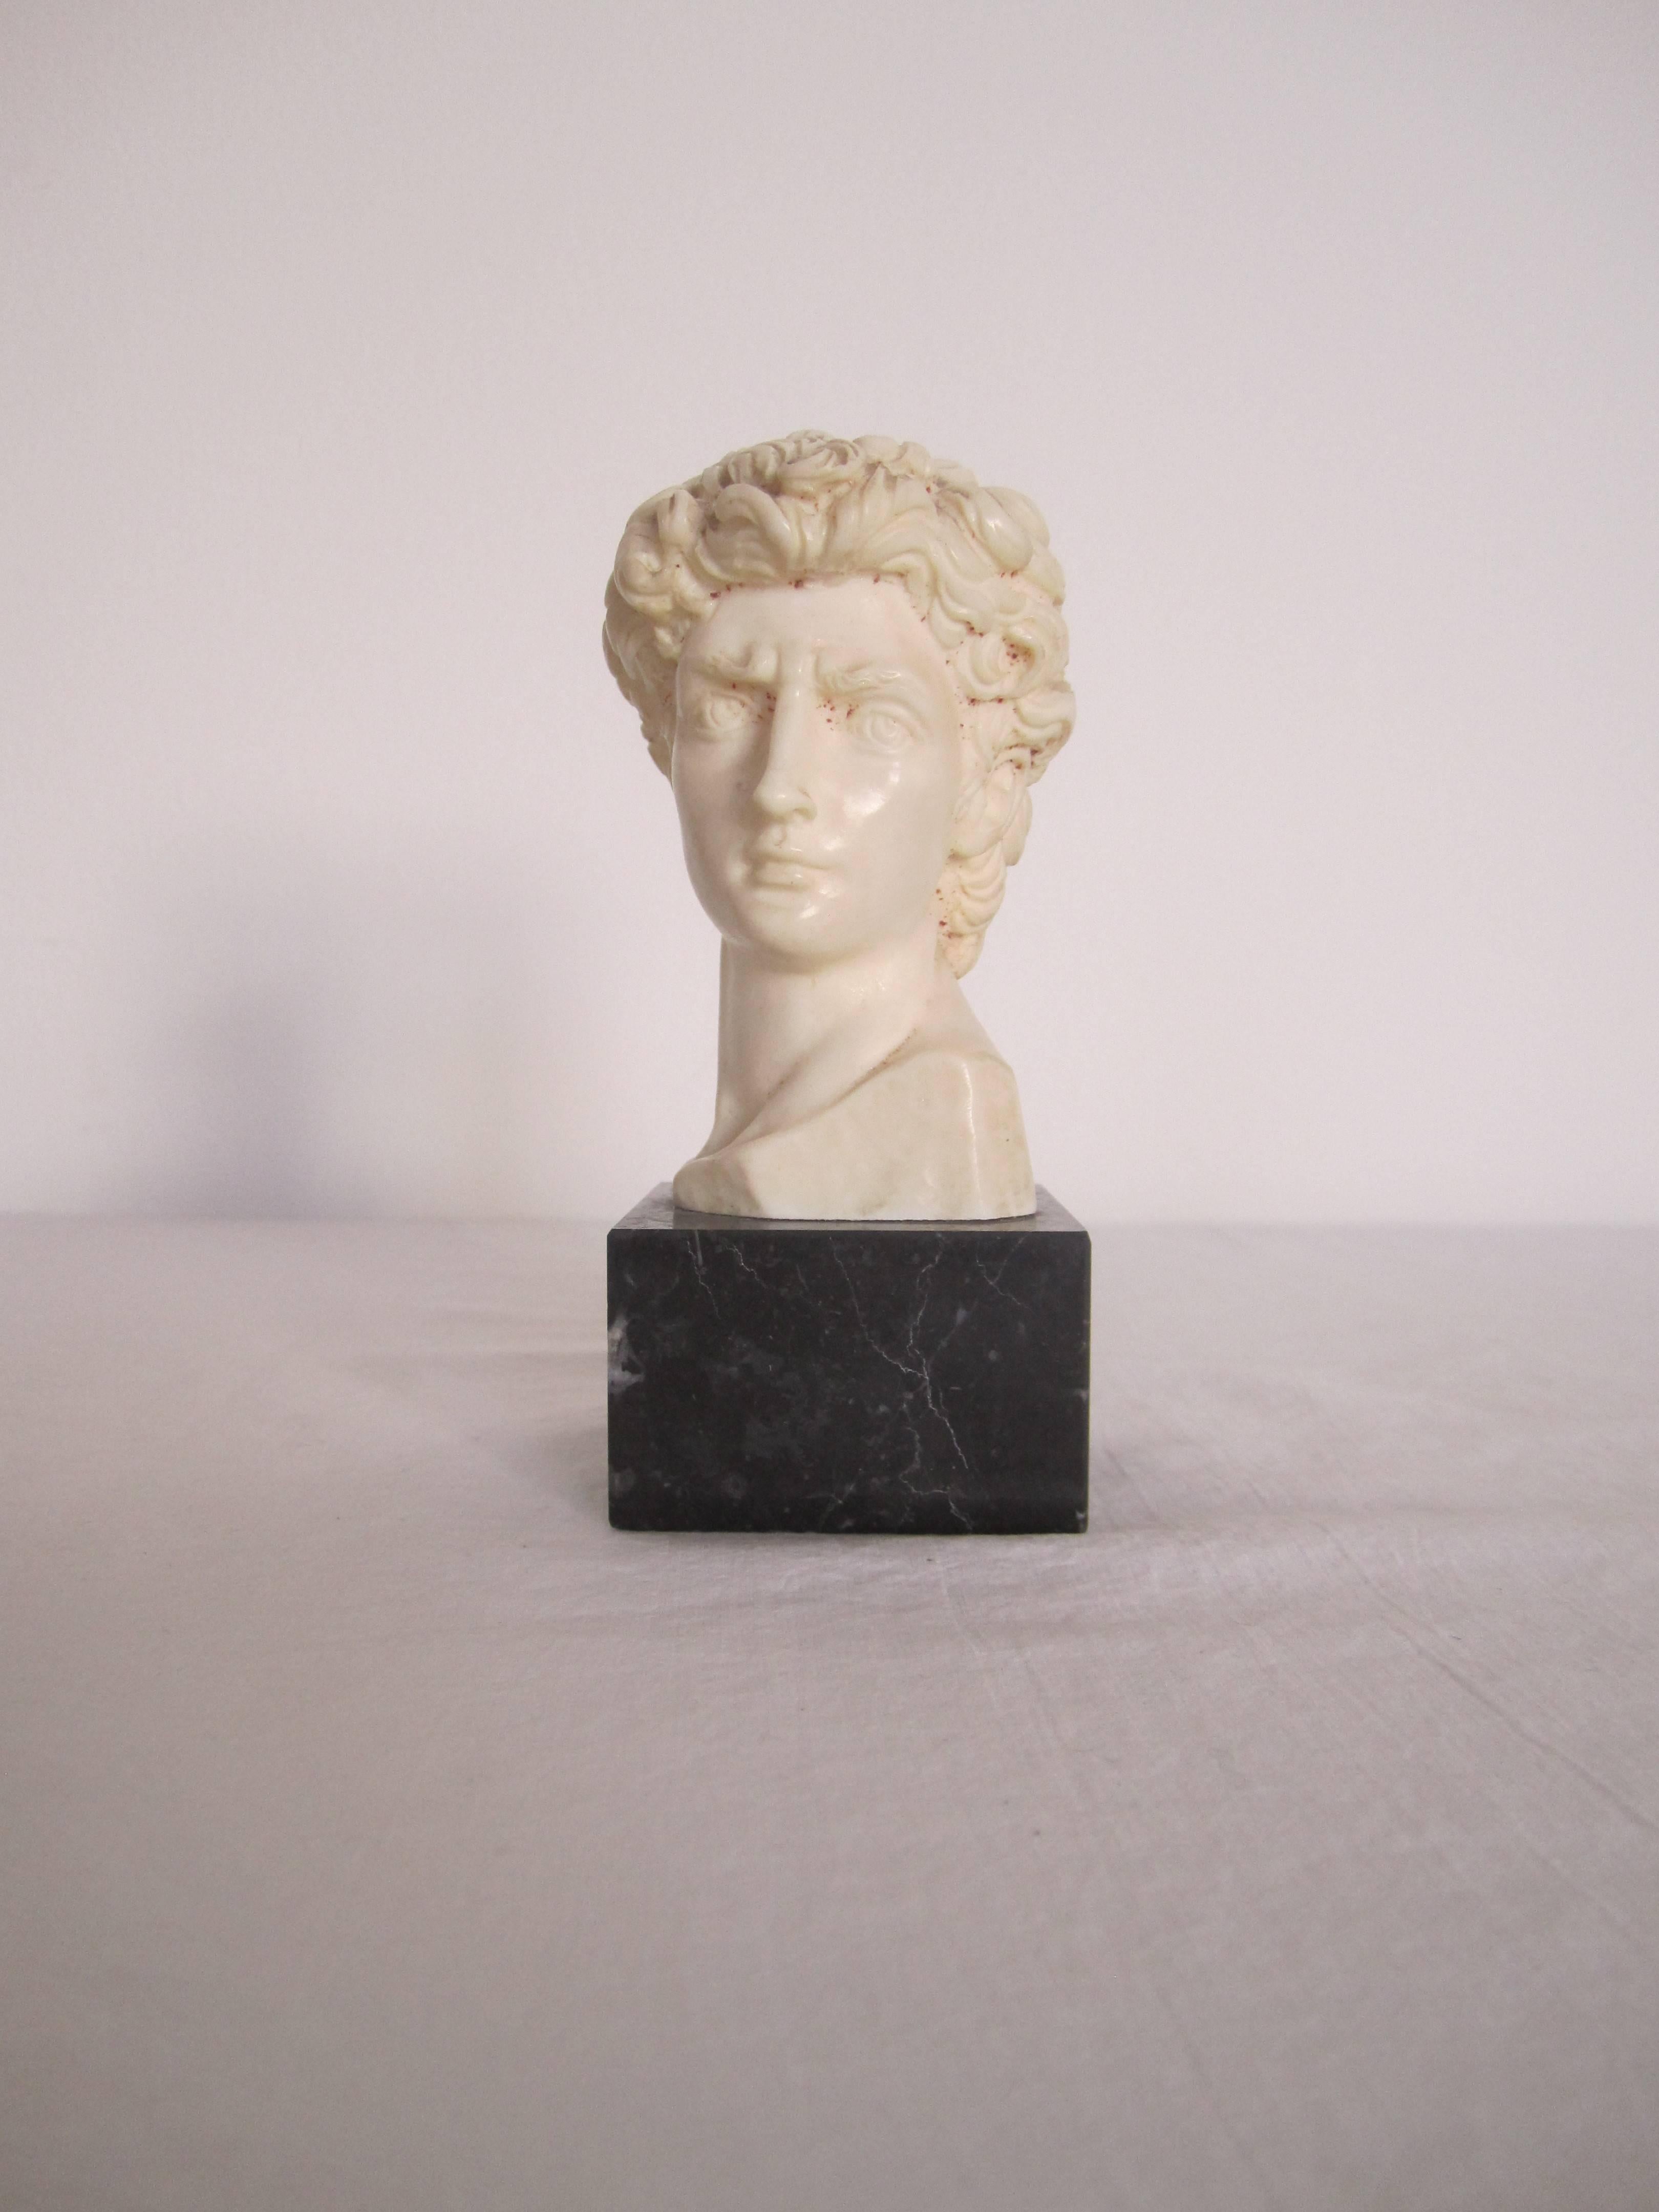 Classic Roman Bust on Black Marble Base after the Statue of David. Resin bust on black marble with white veins base, by sculptor G. Ruggeri. With Makers Mark. Made in Italy. Item available here online, or in my showcase at the Showplace Antique +